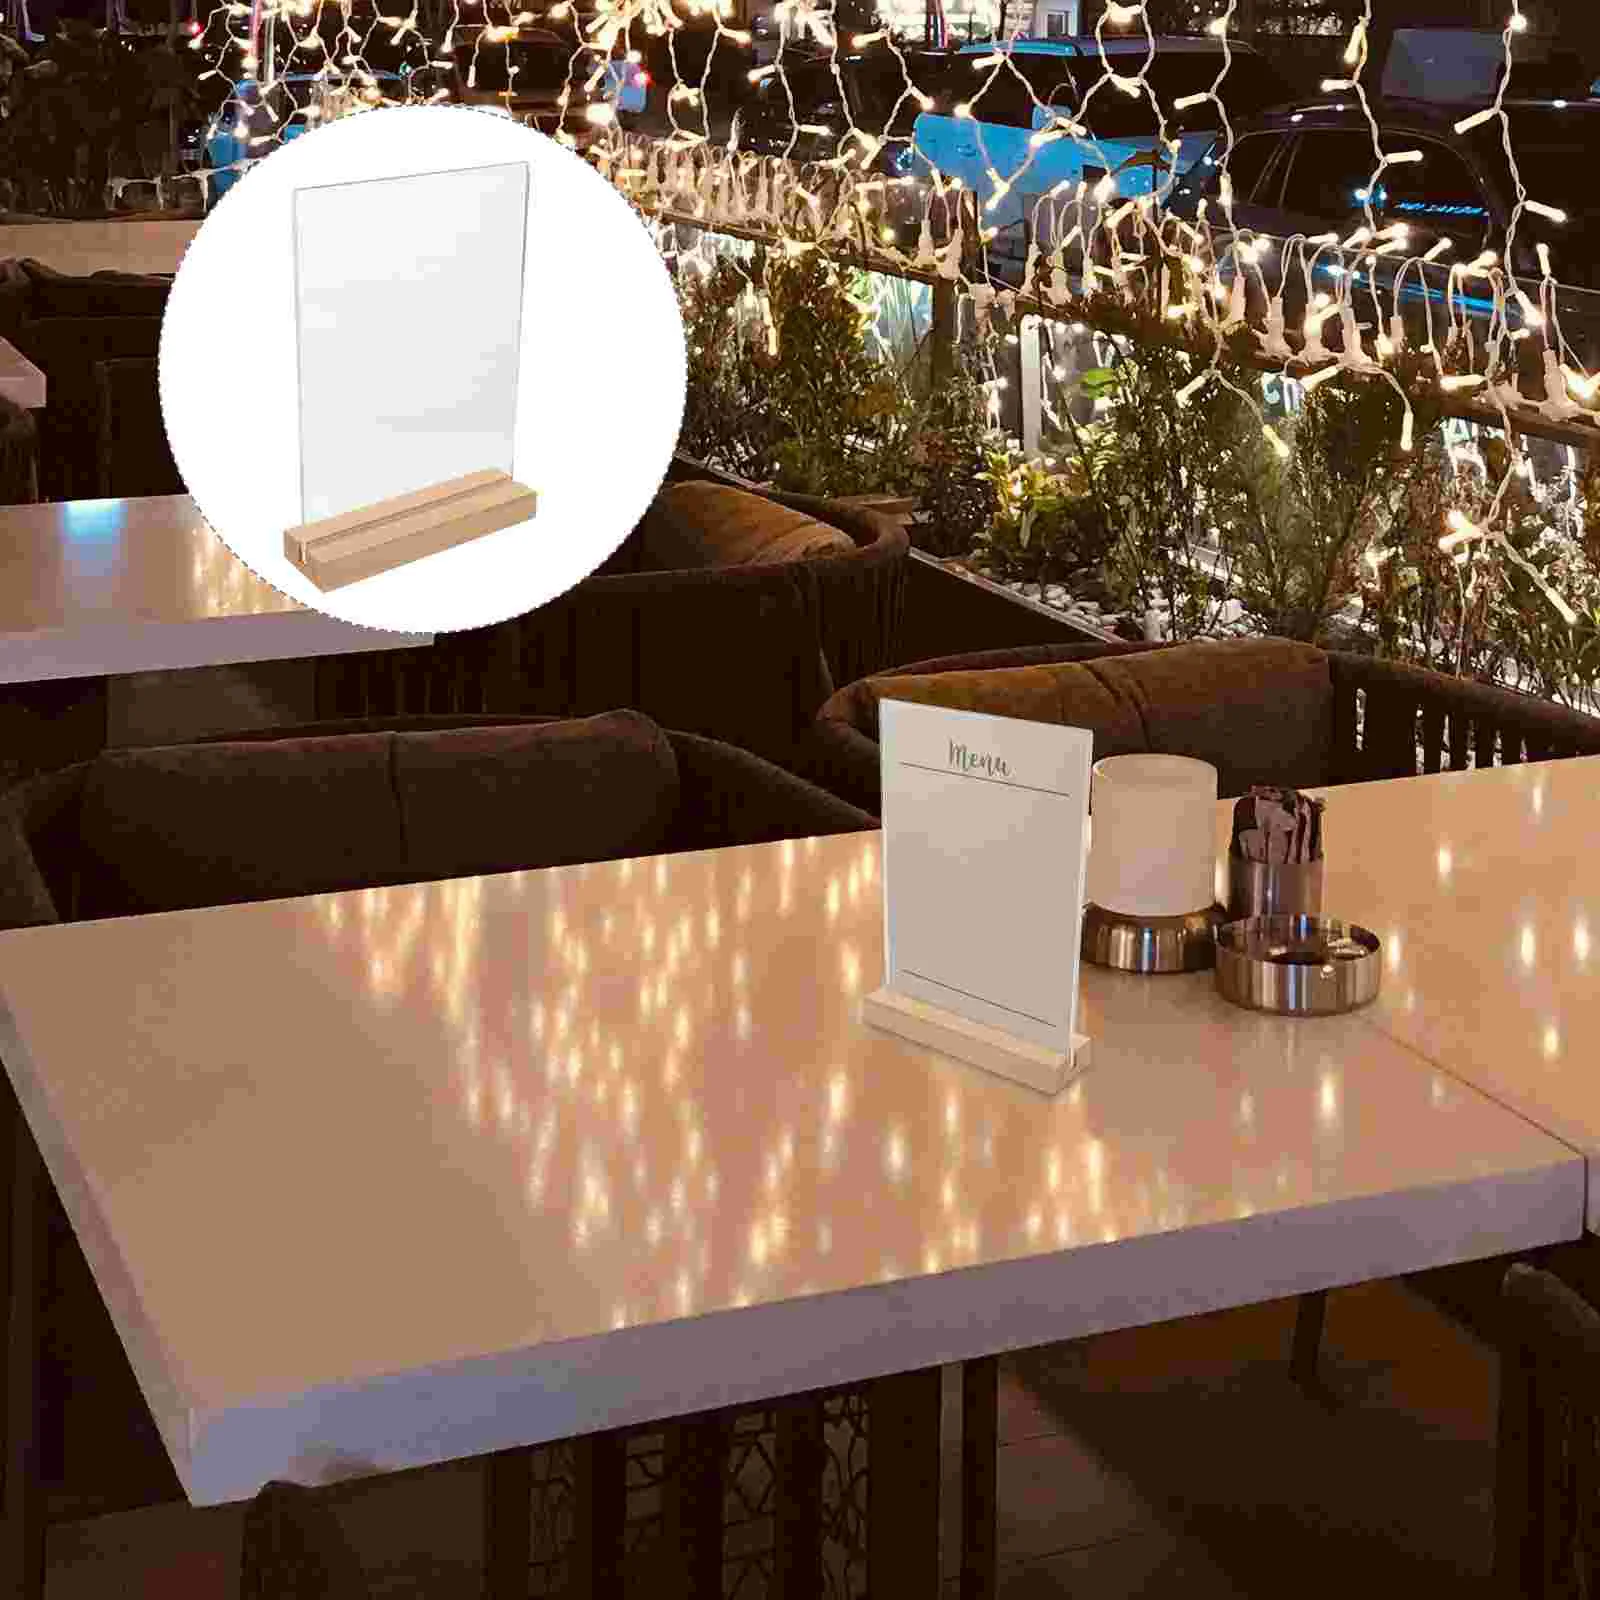 Clear Menu Display Stand Desktop Poster Holder Acrylic Sign Holder for Restaurants with Wood Base 6 inch clear freestanding desktop sign holder display stand wood acrylic picture photo frames